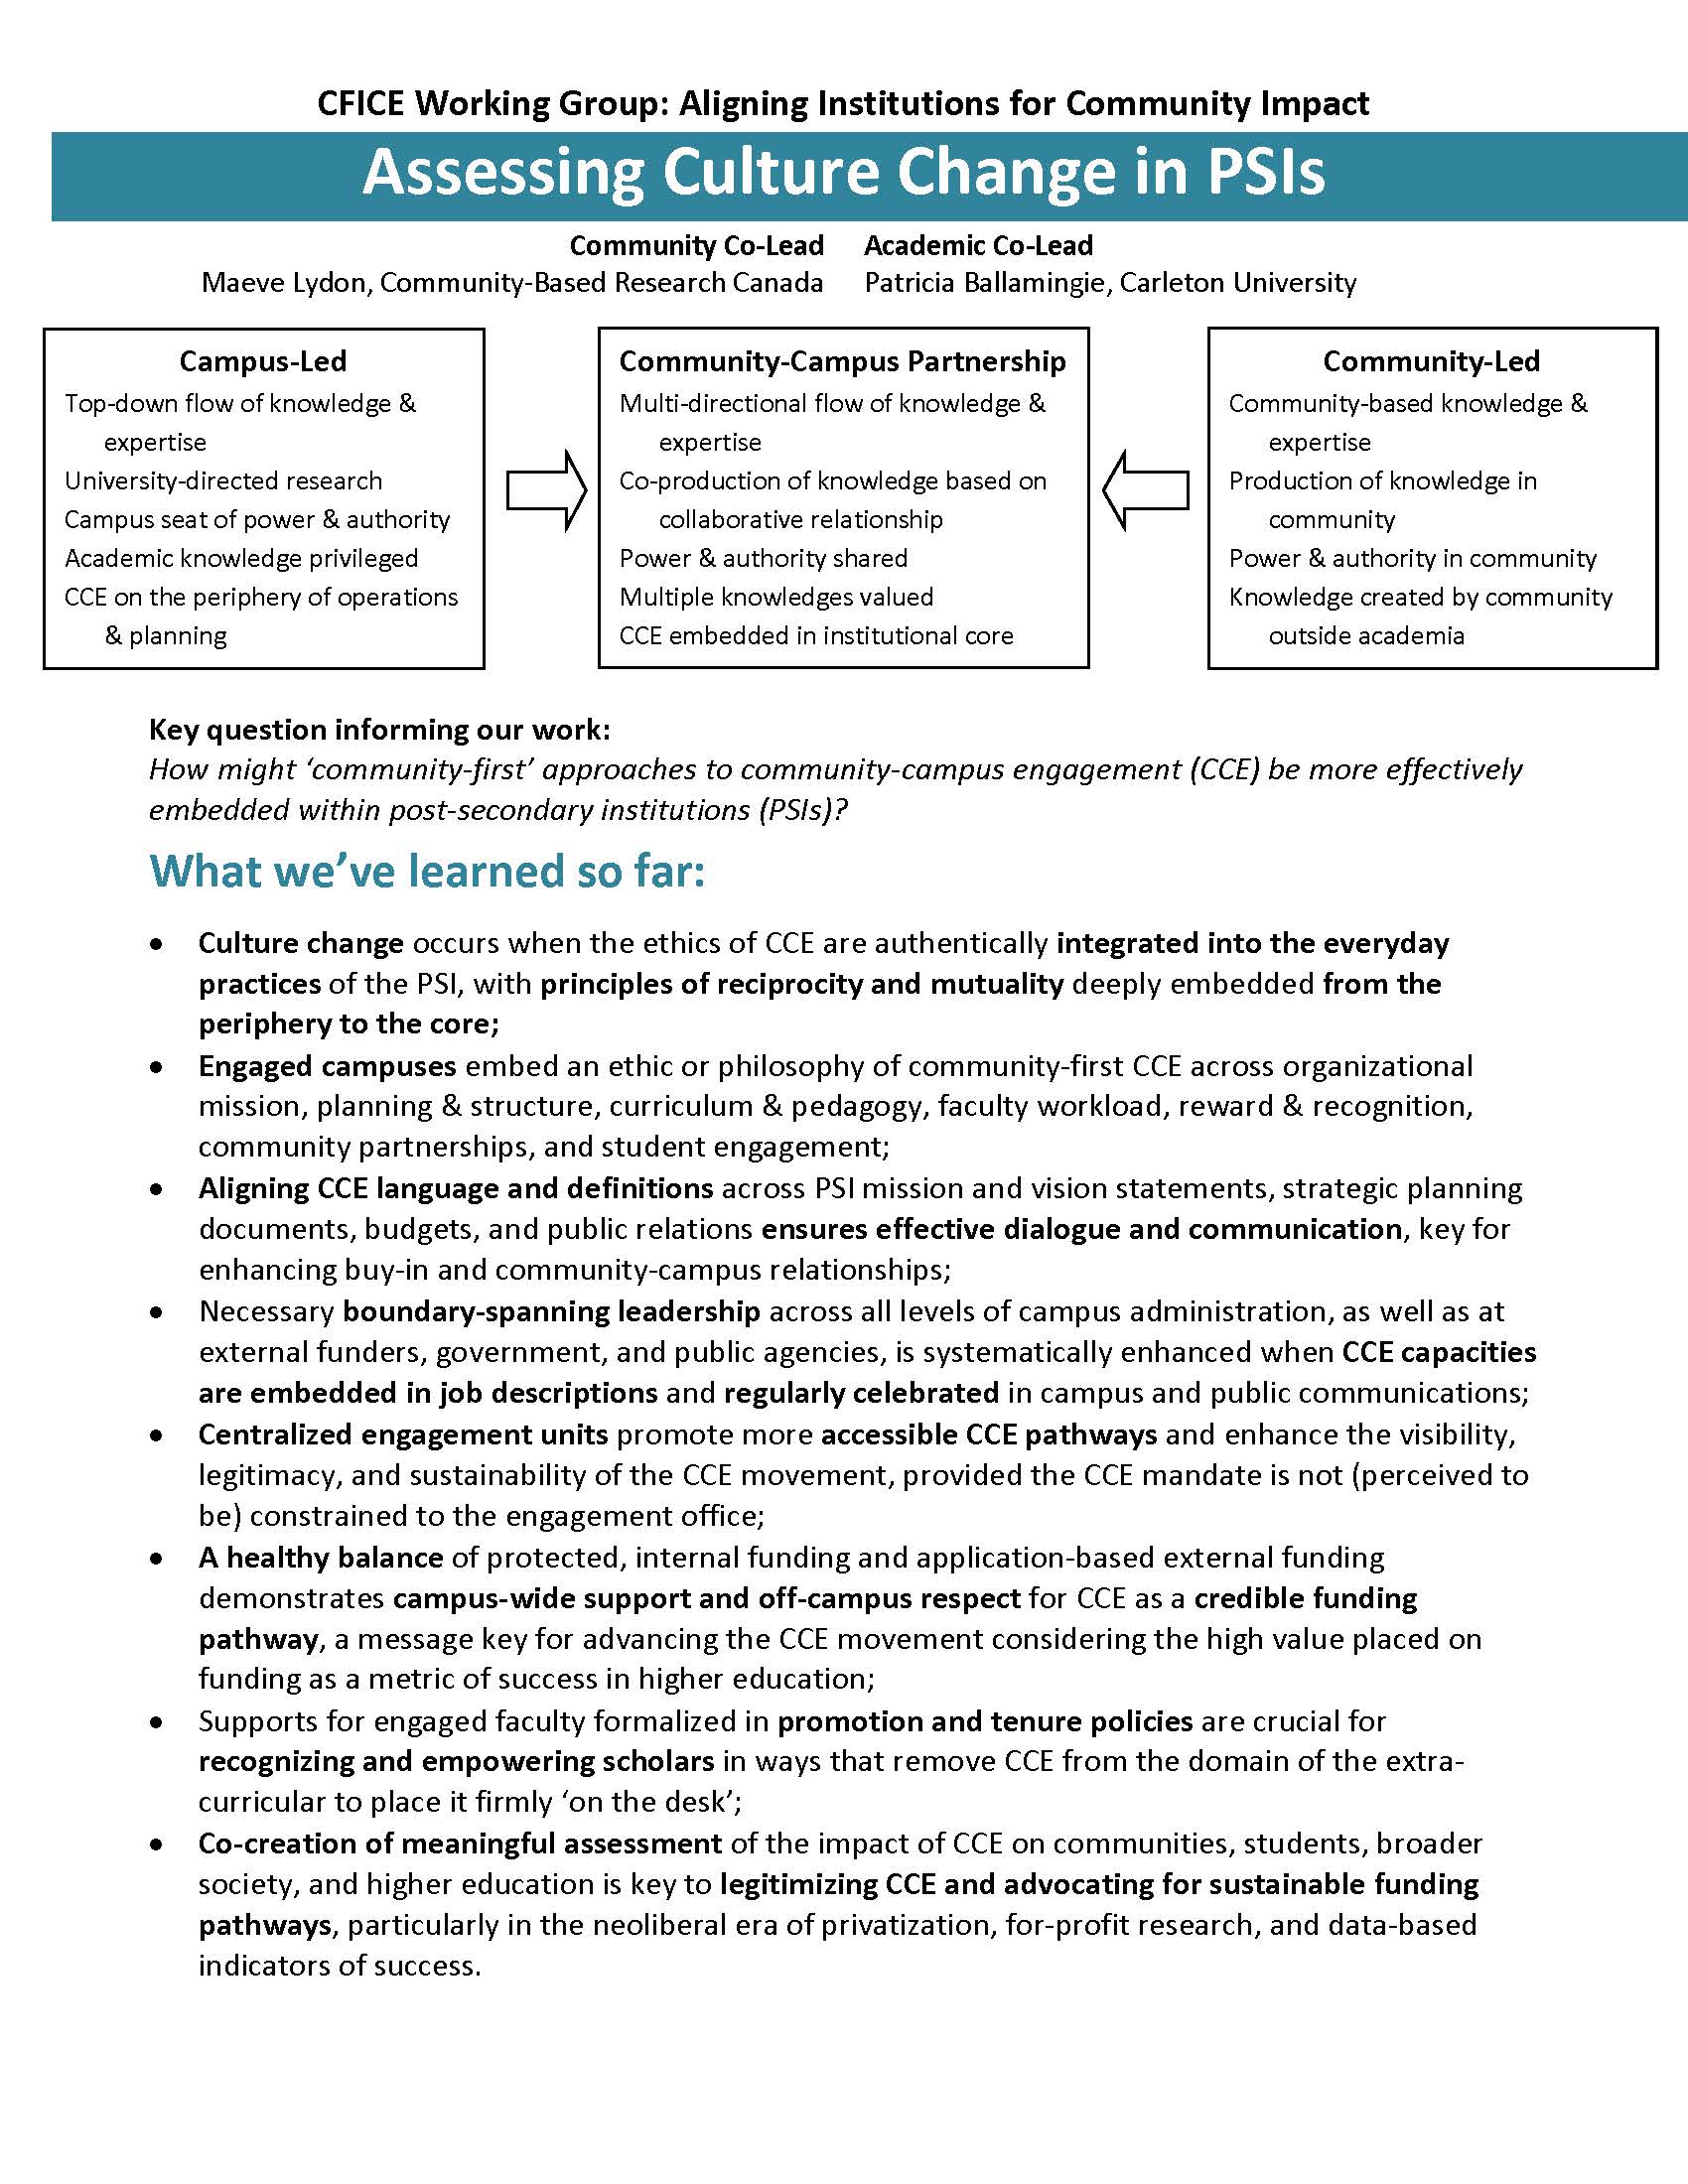 Page 1 of the executive summary of AICI's literature review on a community-first classification system for CCE. Click on the image to download the PDF file.